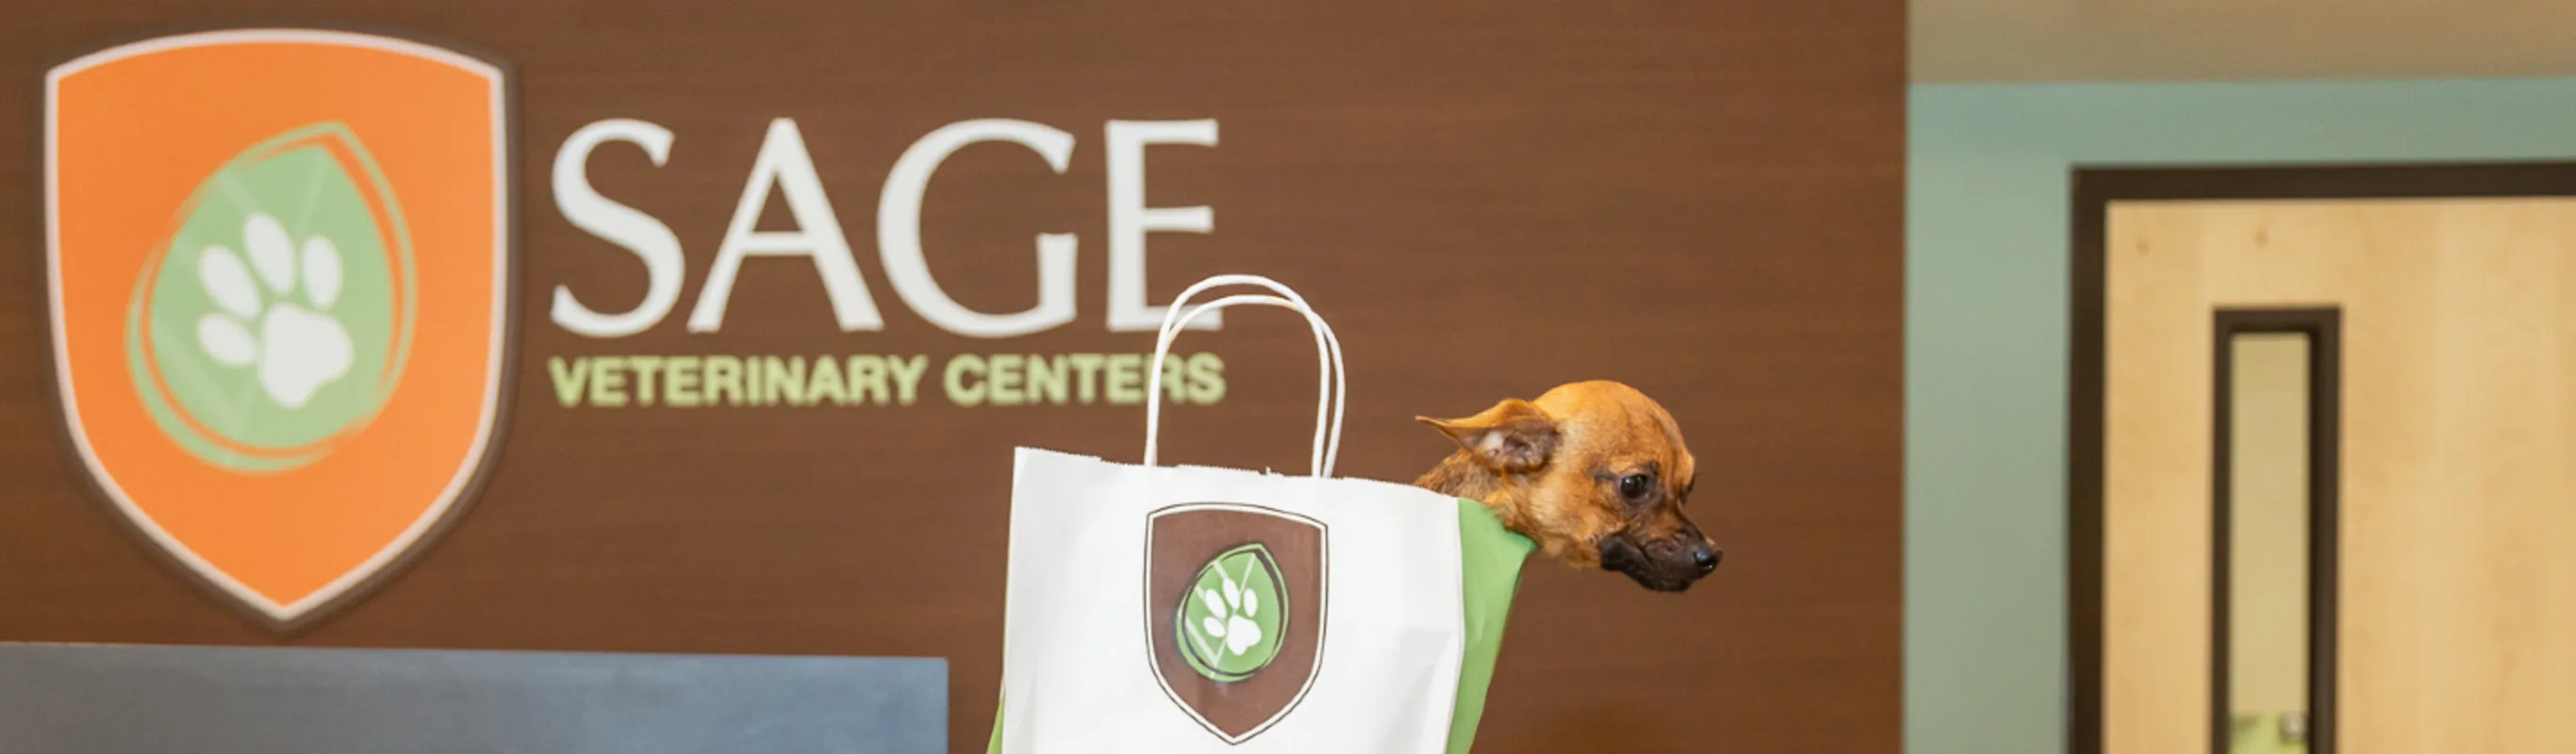 The front office of the SAGE concord location with a brown dog inside of a bag 